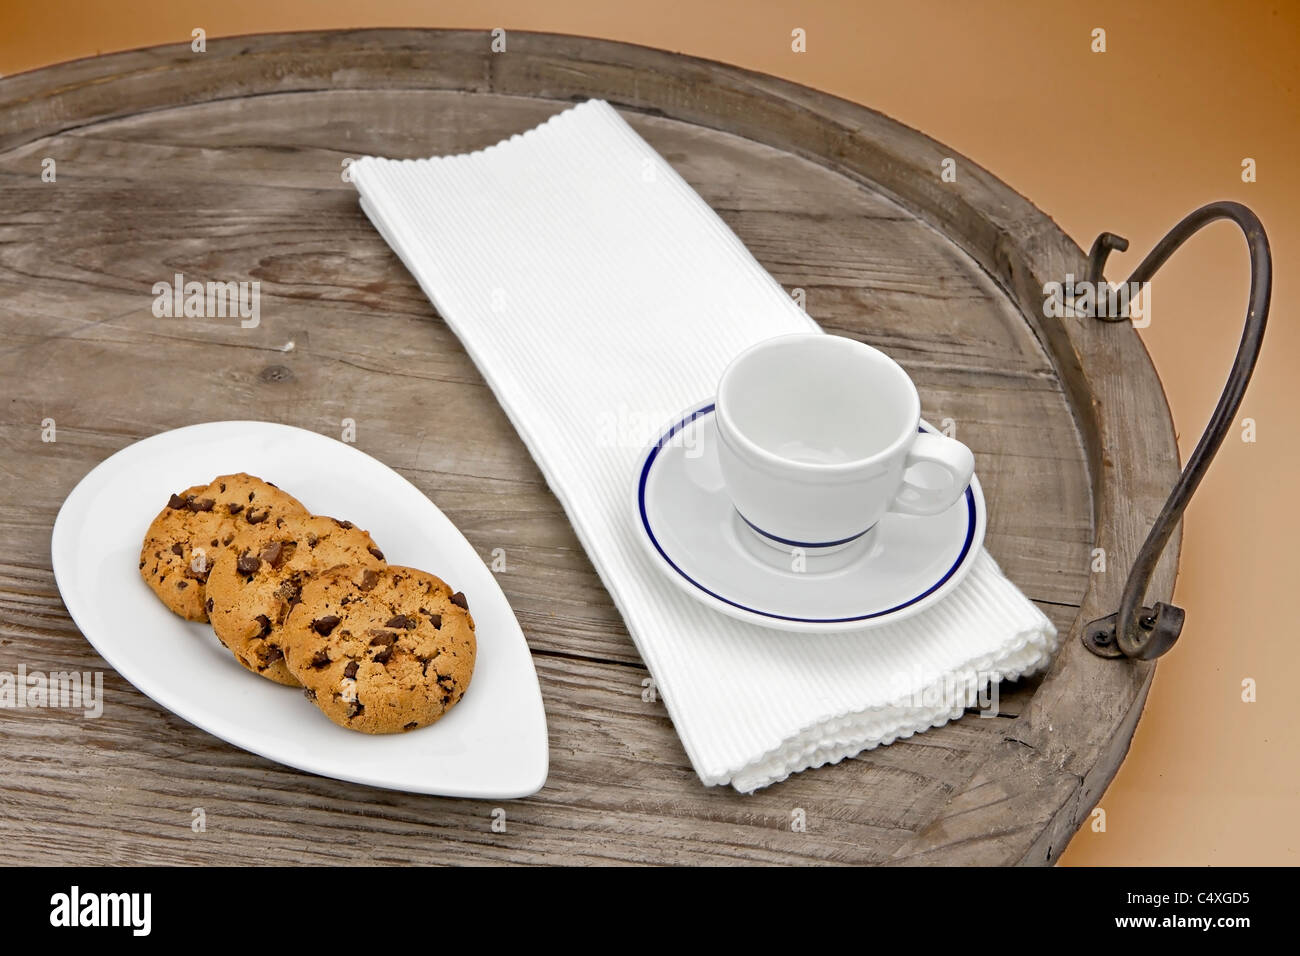 Chocolate chip cookies served on an antique wooden tray Stock Photo